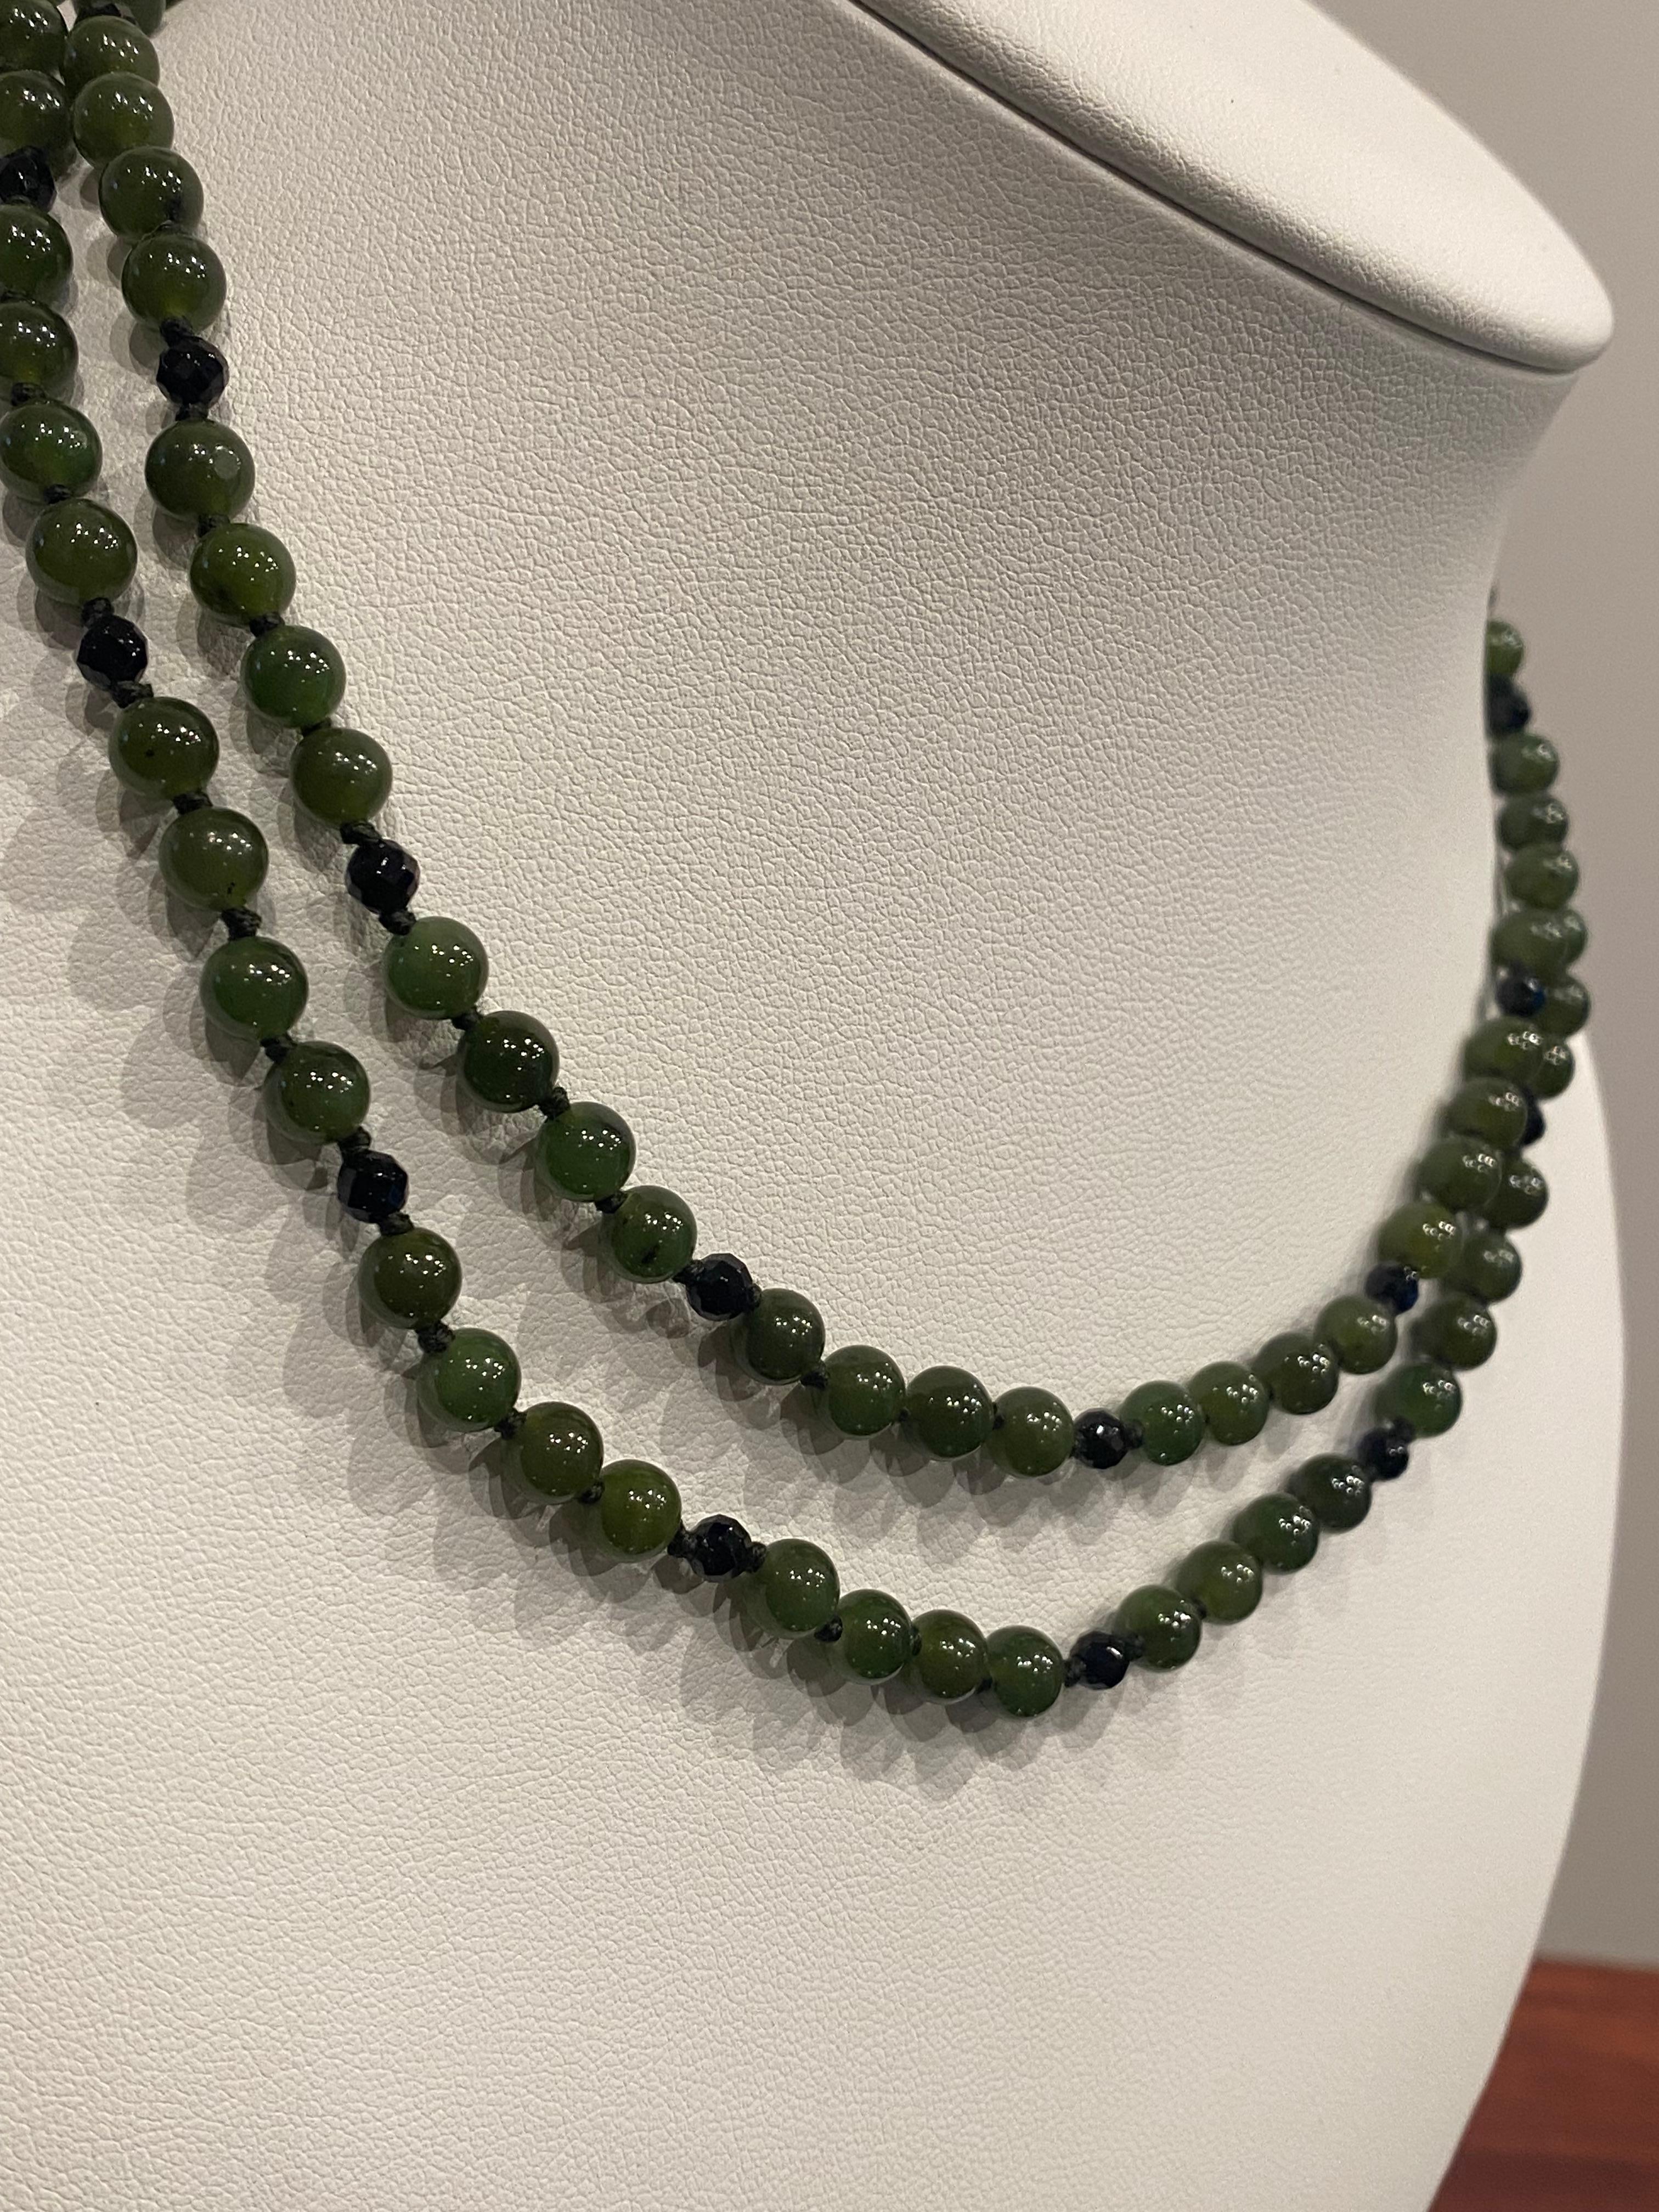 Comprising of fine & well-matched 
Natural Jadeite beads of 7mm each 
of deep intense green colour

Sections of 4 are separated by 
black faceted onyx beads,
creating an elegant look 

Completed by a comfortable & secure parrot clasp, 
crafted in